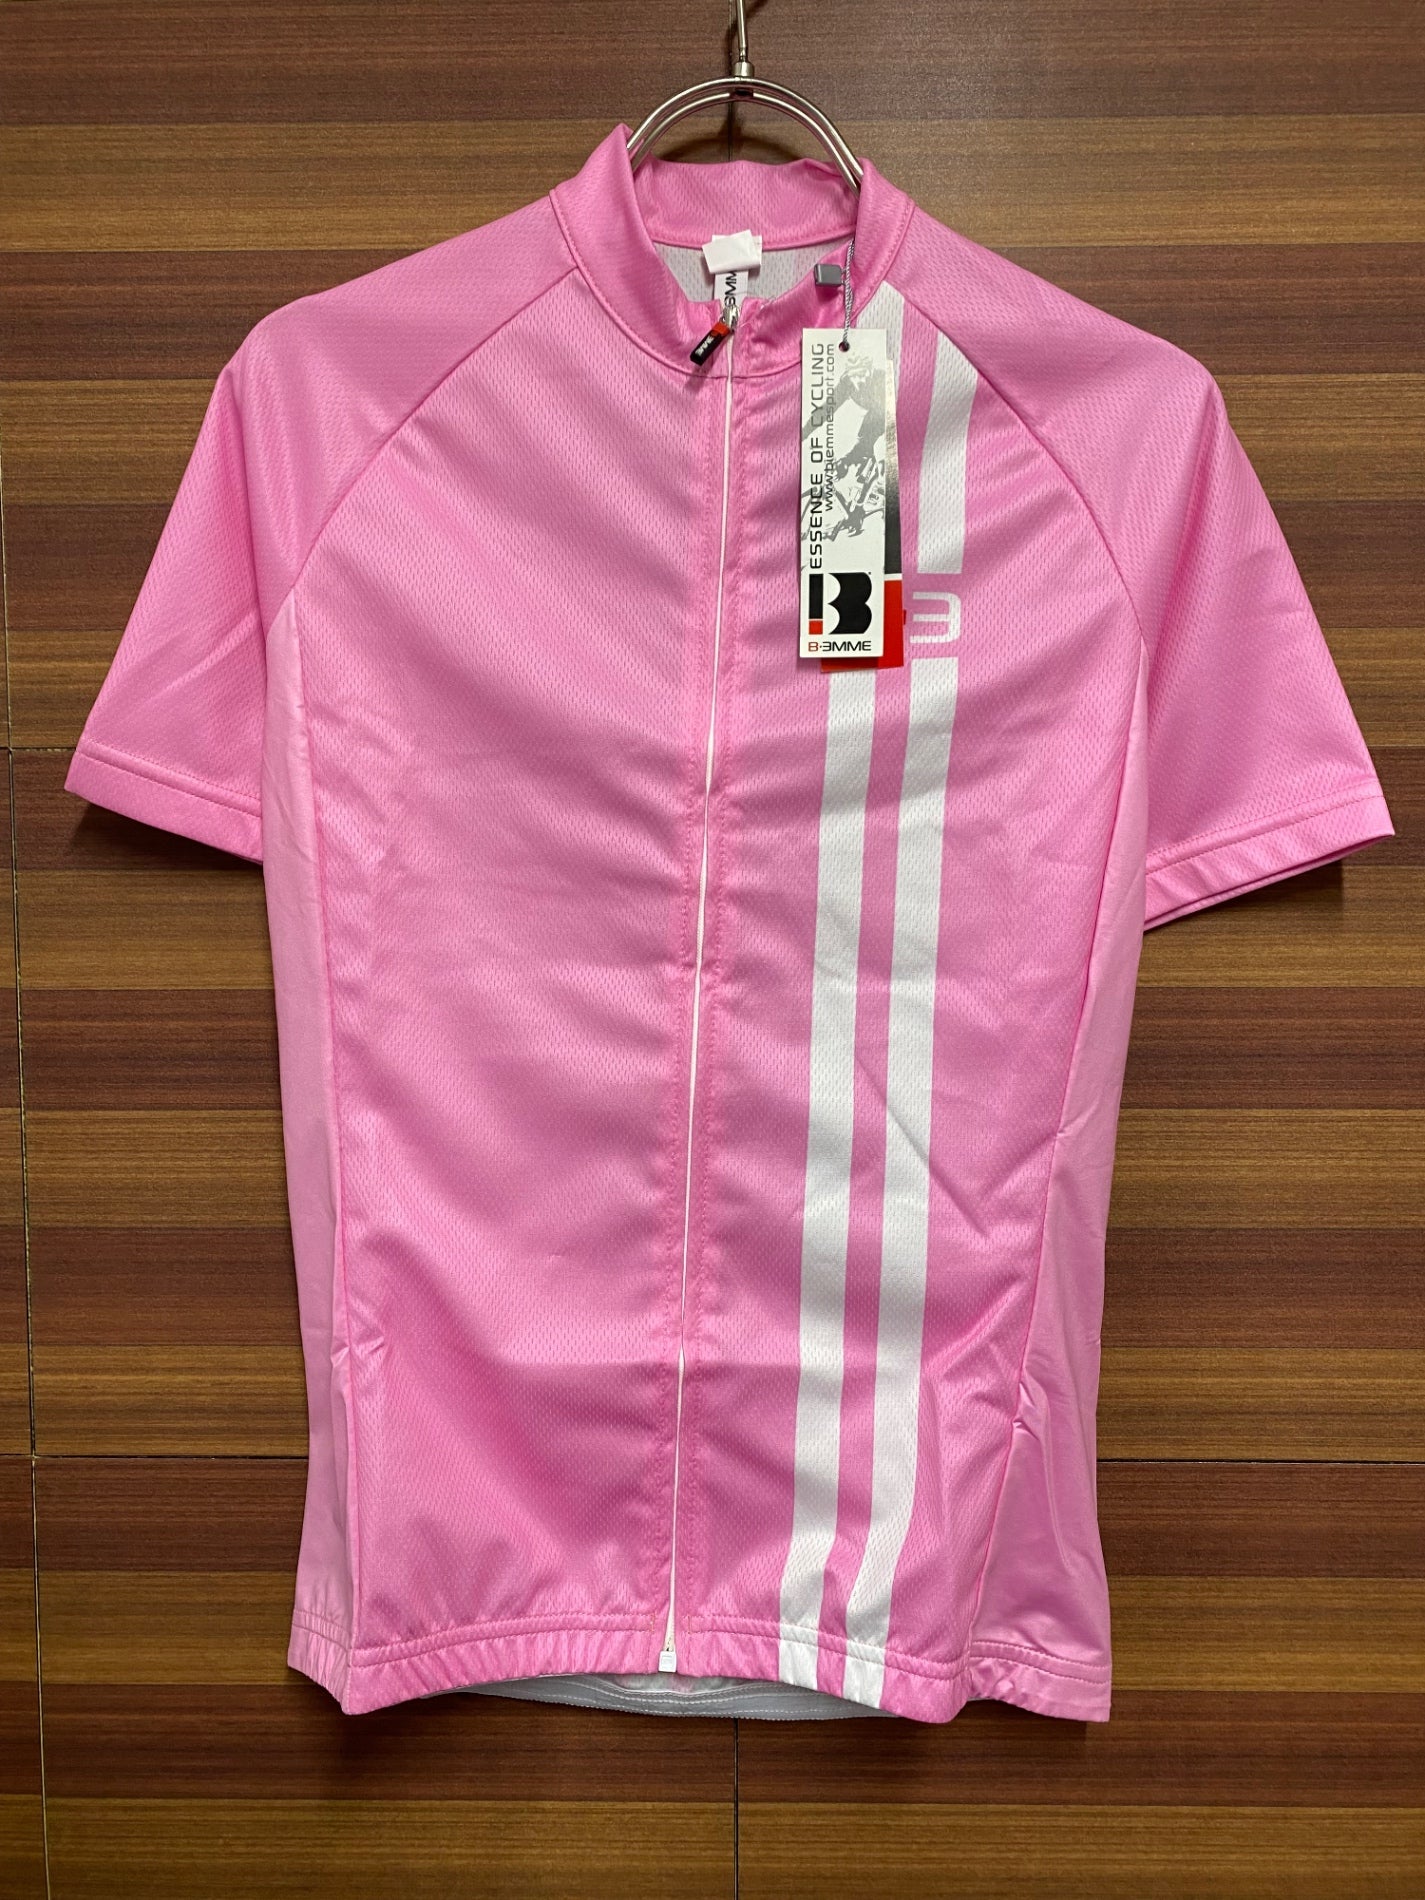 HO962 ビエンメ BIEMME 16SS ITEM TWO JERSEY サイクルジャージ LADY PINK ピンク M